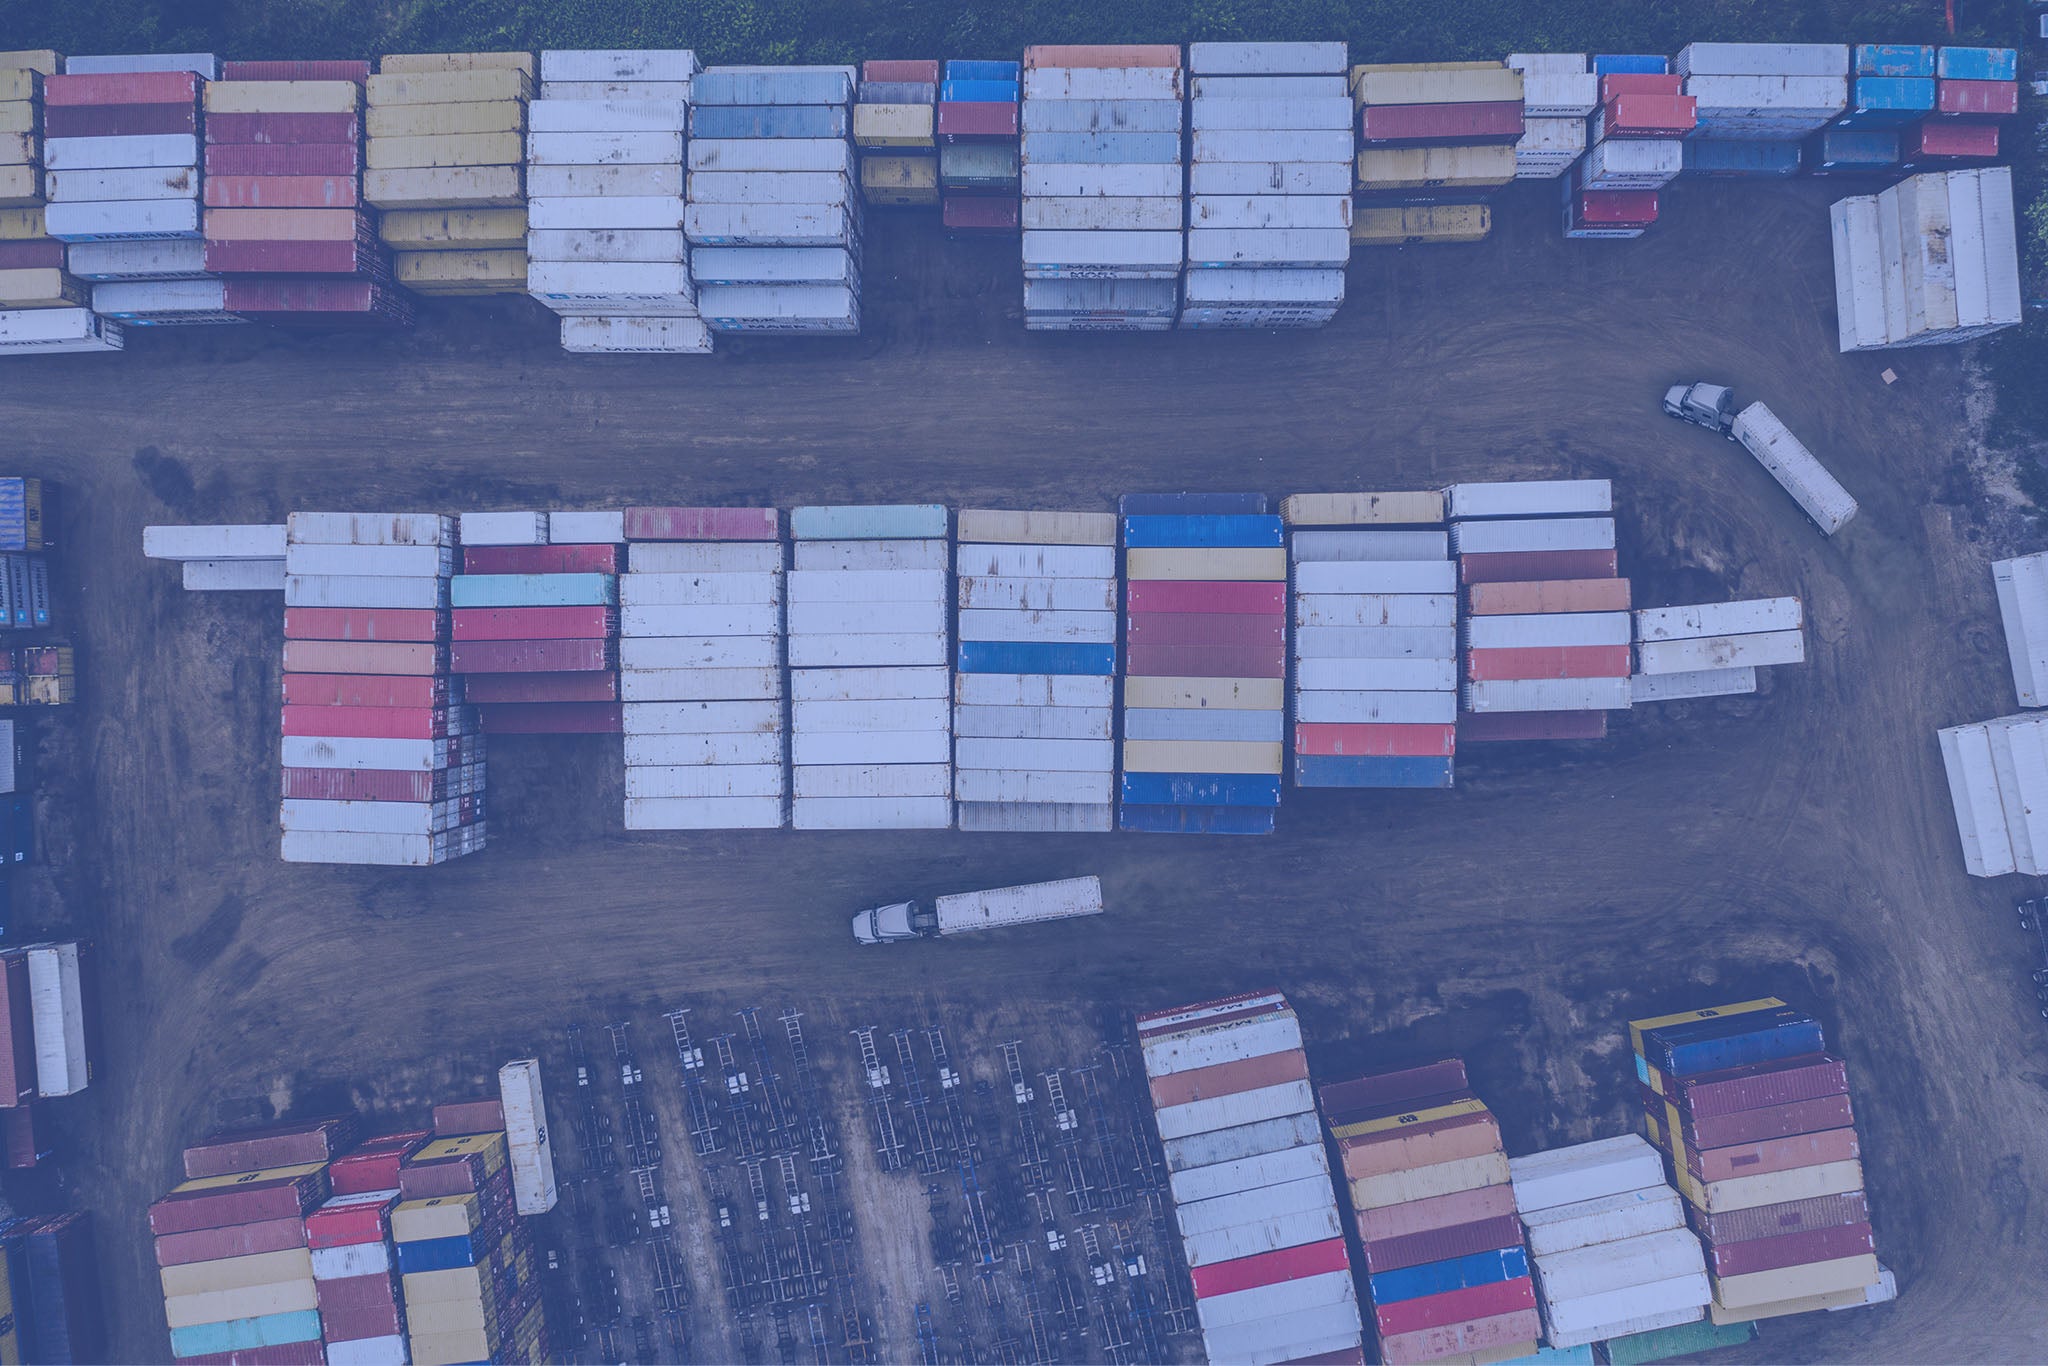 Slideshow Image of large containers of expensive assets utilizing heavy equipment and asset tracking solutions provided by On Demand Tracking